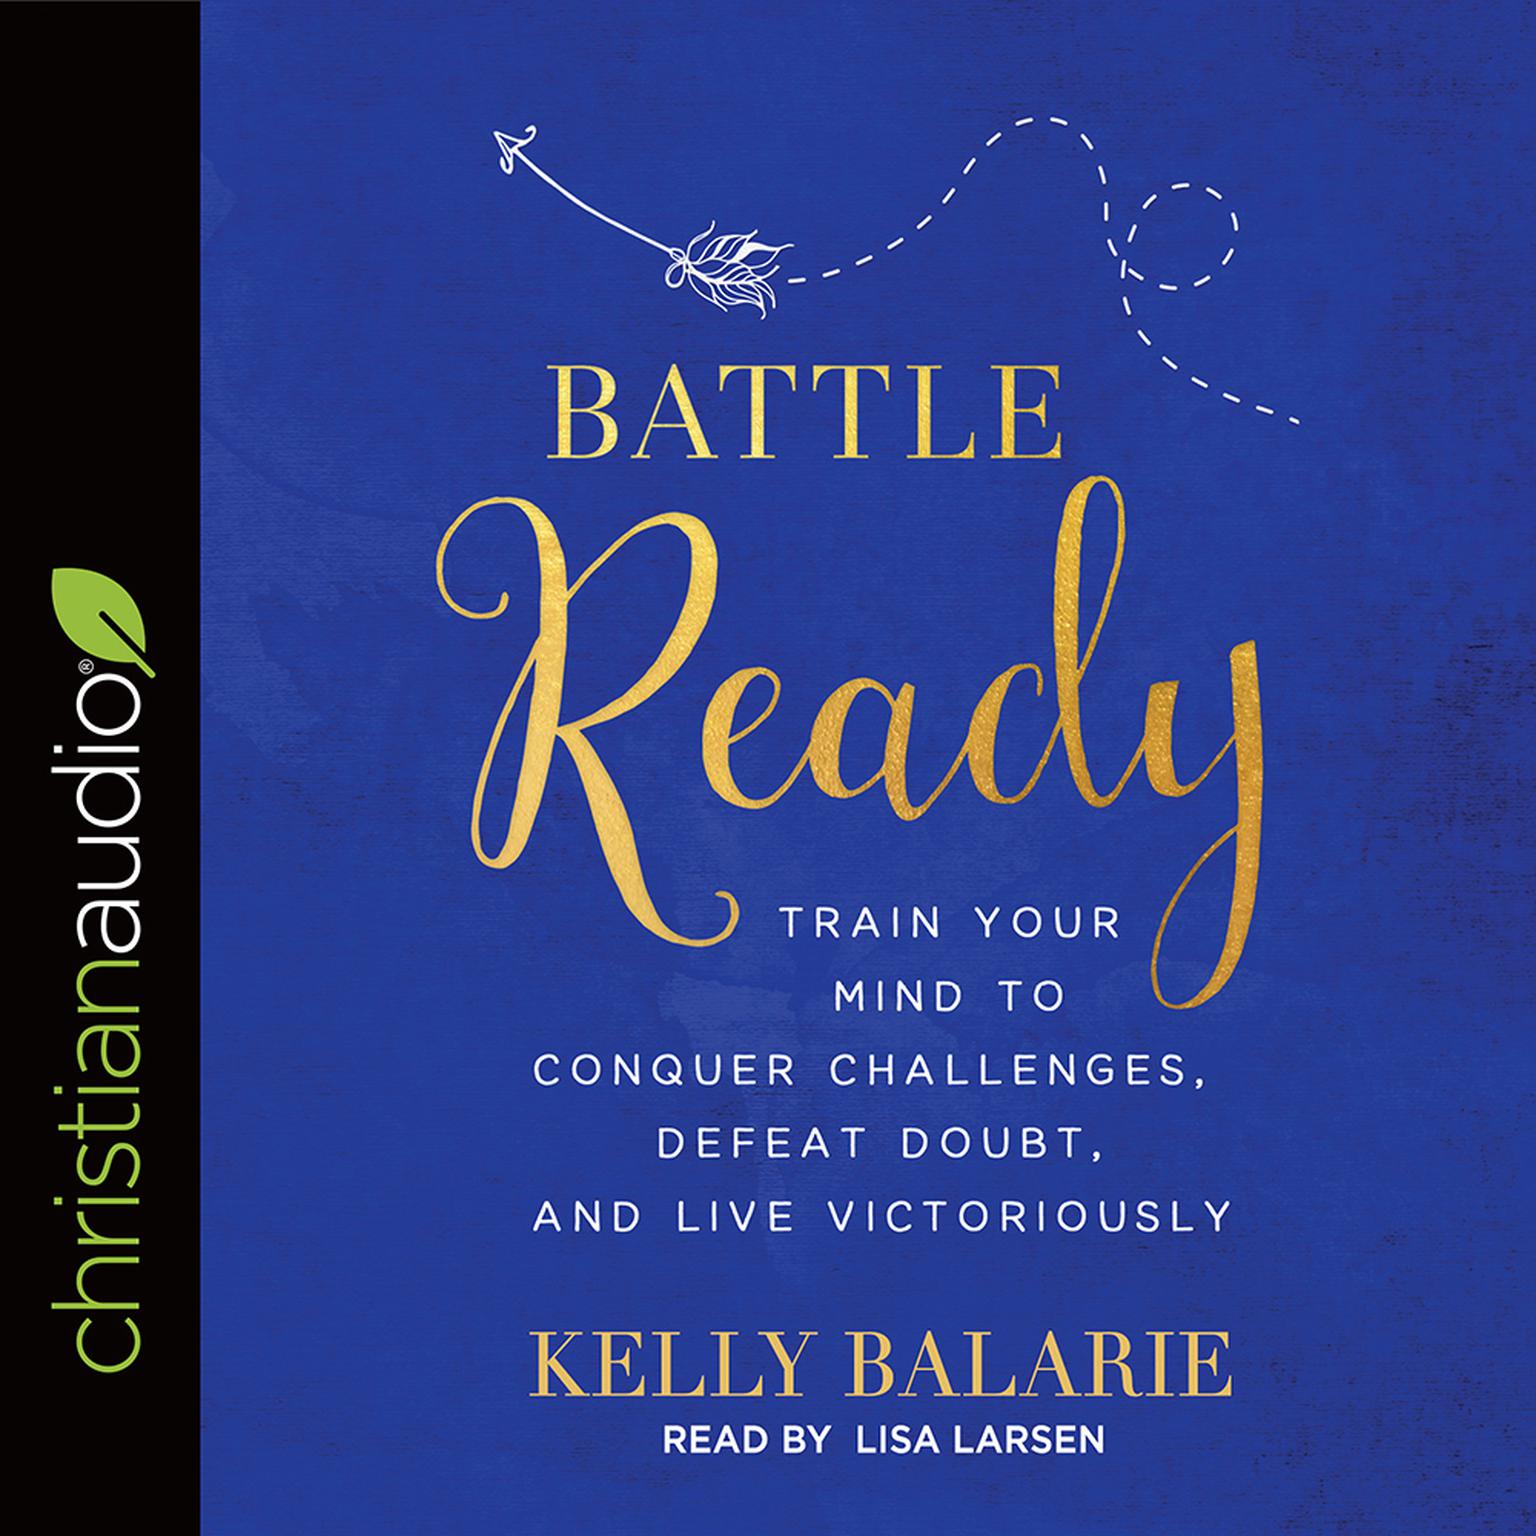 Battle Ready: Train Your Mind to Conquer Challenges, Defeat Doubt, and Live Victoriously Audiobook, by Kelly Balarie